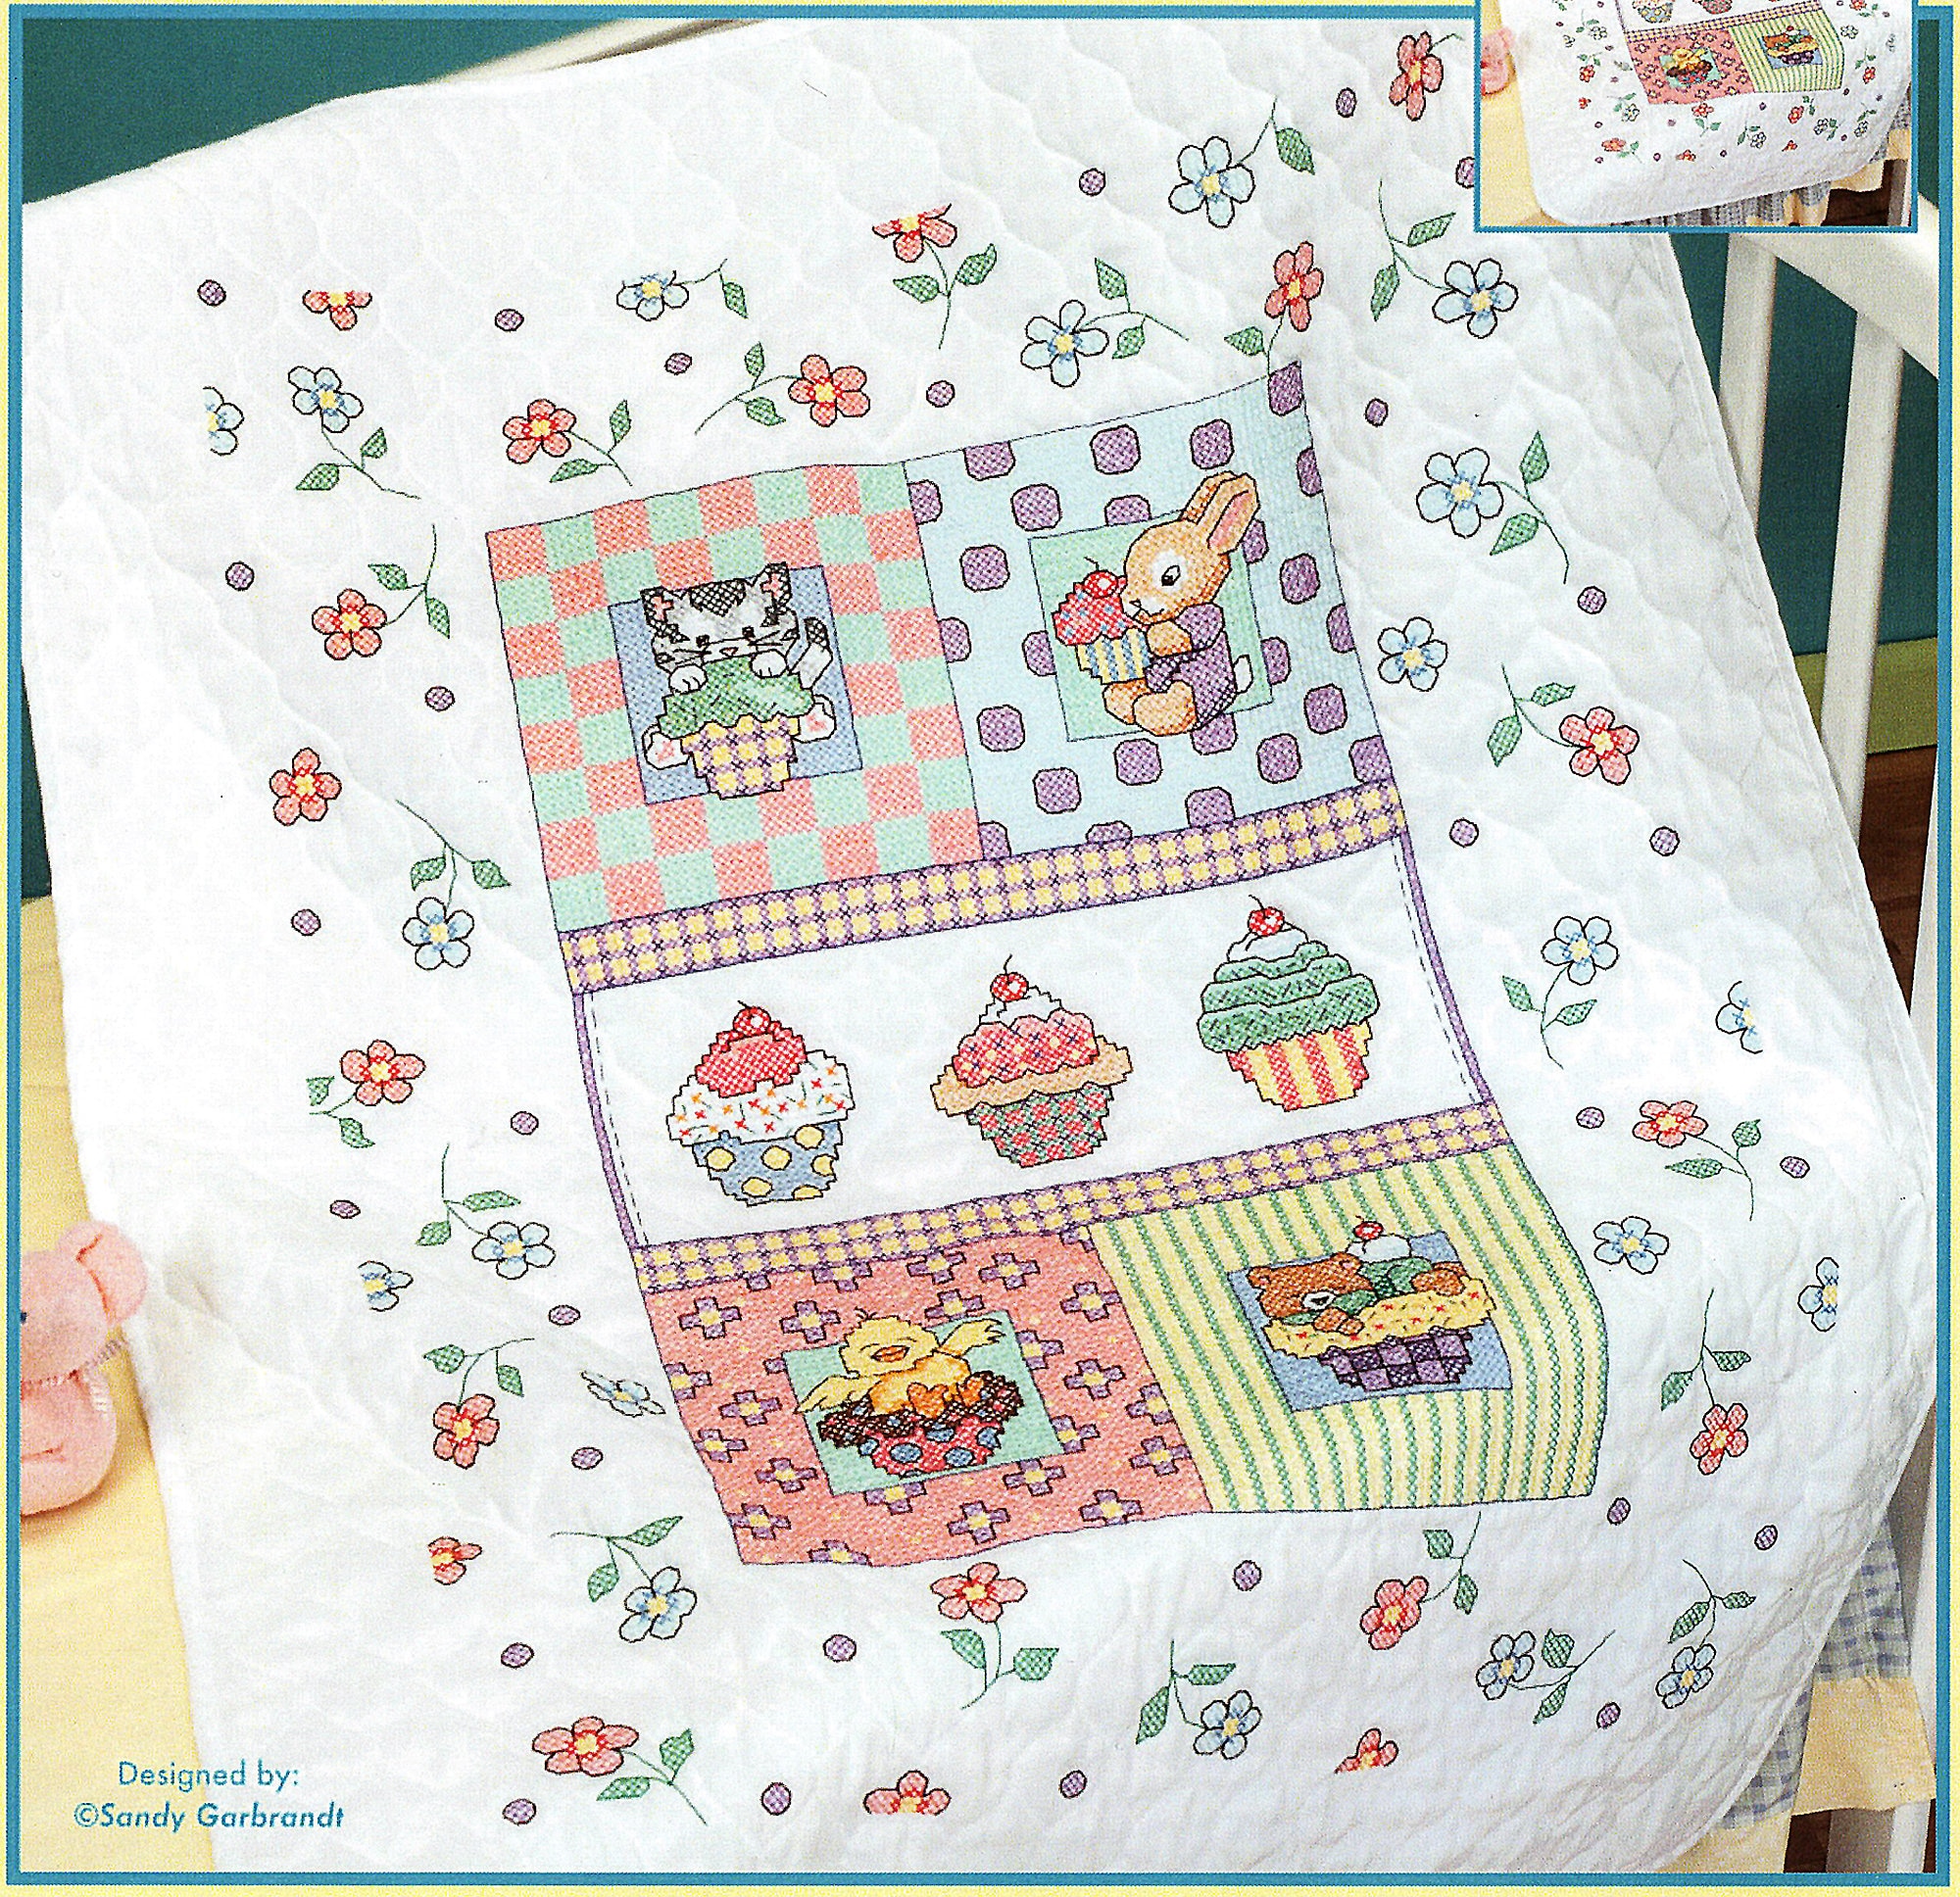 VINTAGE Janlynn Fly Away Bunny Crib Cover Baby Quilt Stamped Cross Stitch  Kit 